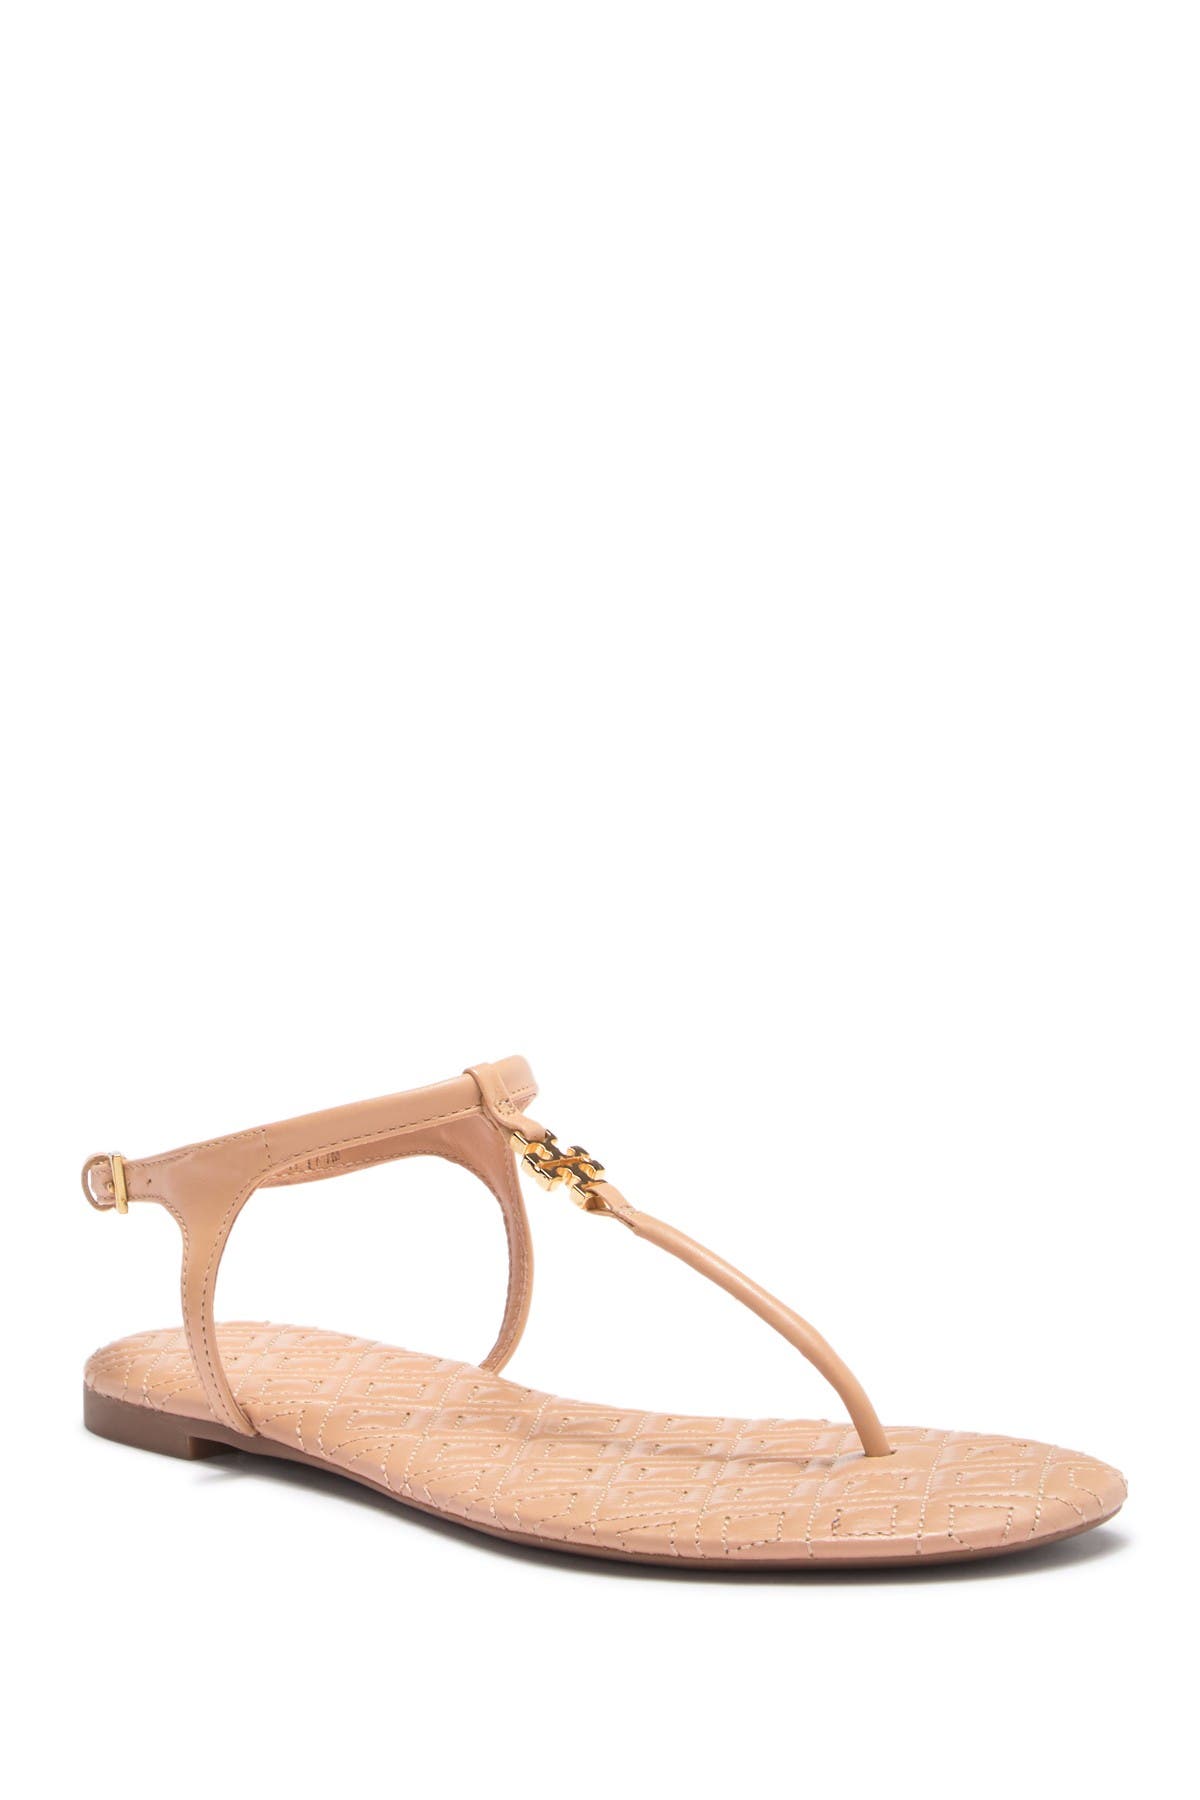 Tory Burch | Marion Quilted Sandal 